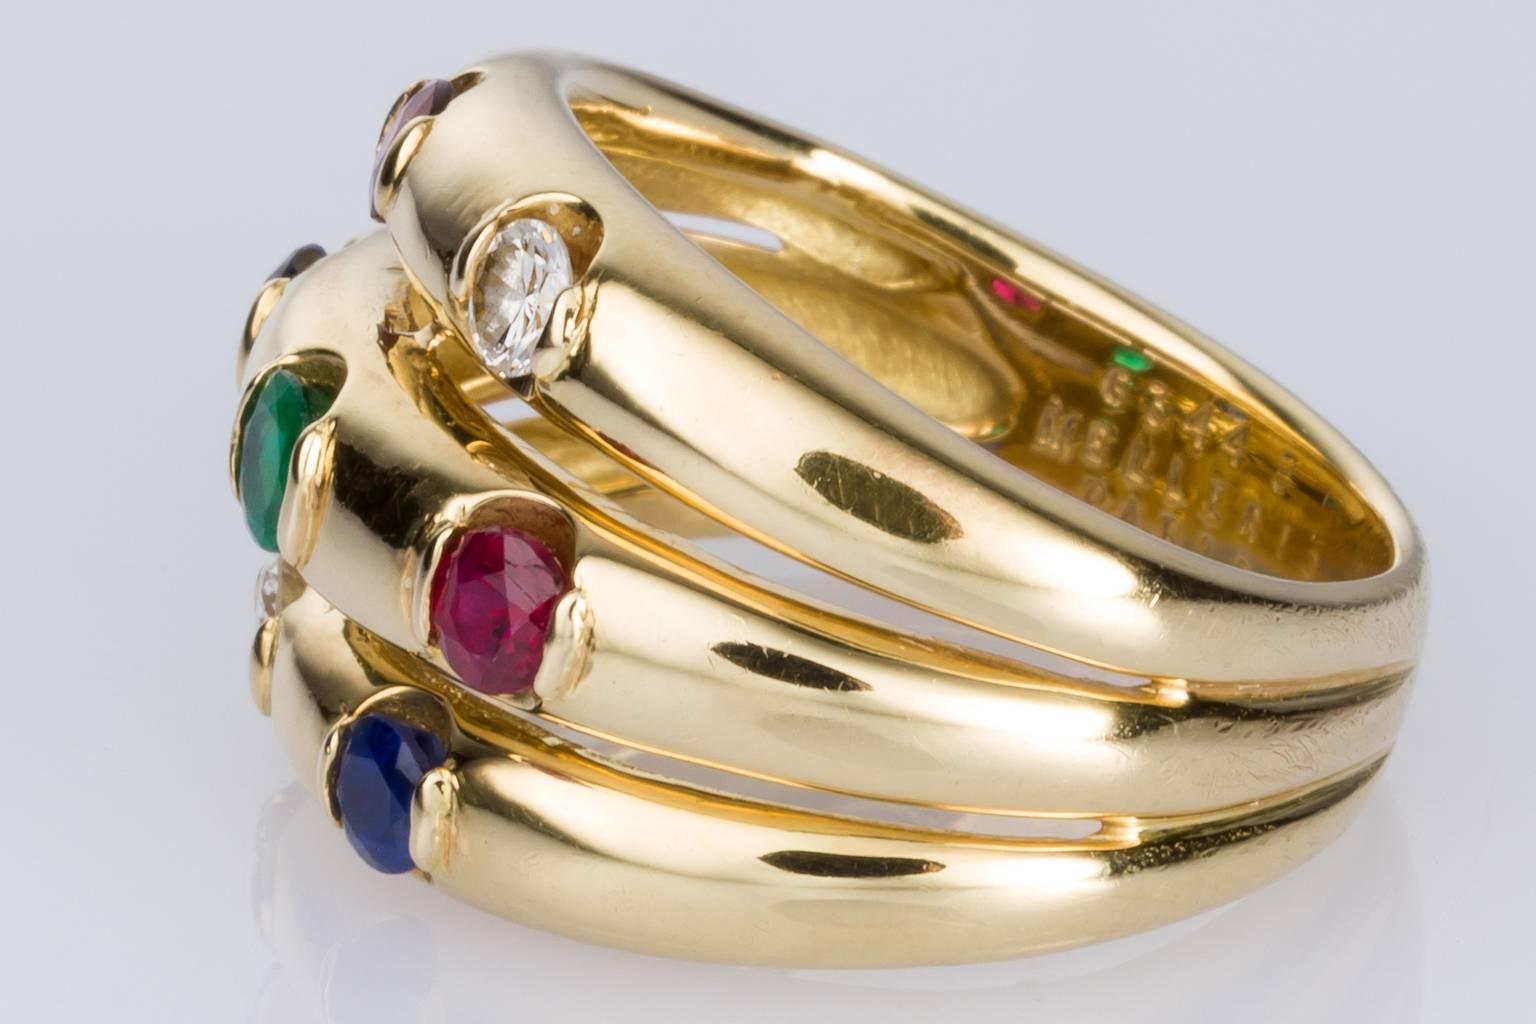 Mellerio Paris, a multi-gemstone 18k yellow gold ring consisting of three high domed bands, set with 2 x semi set diamonds total weight 0.16ct H colour, SI clarity, 2 x 2.80mm semi set rubies, 2 x 2.80mm semi set Ceylon type sapphires and 1 x 3.00mm